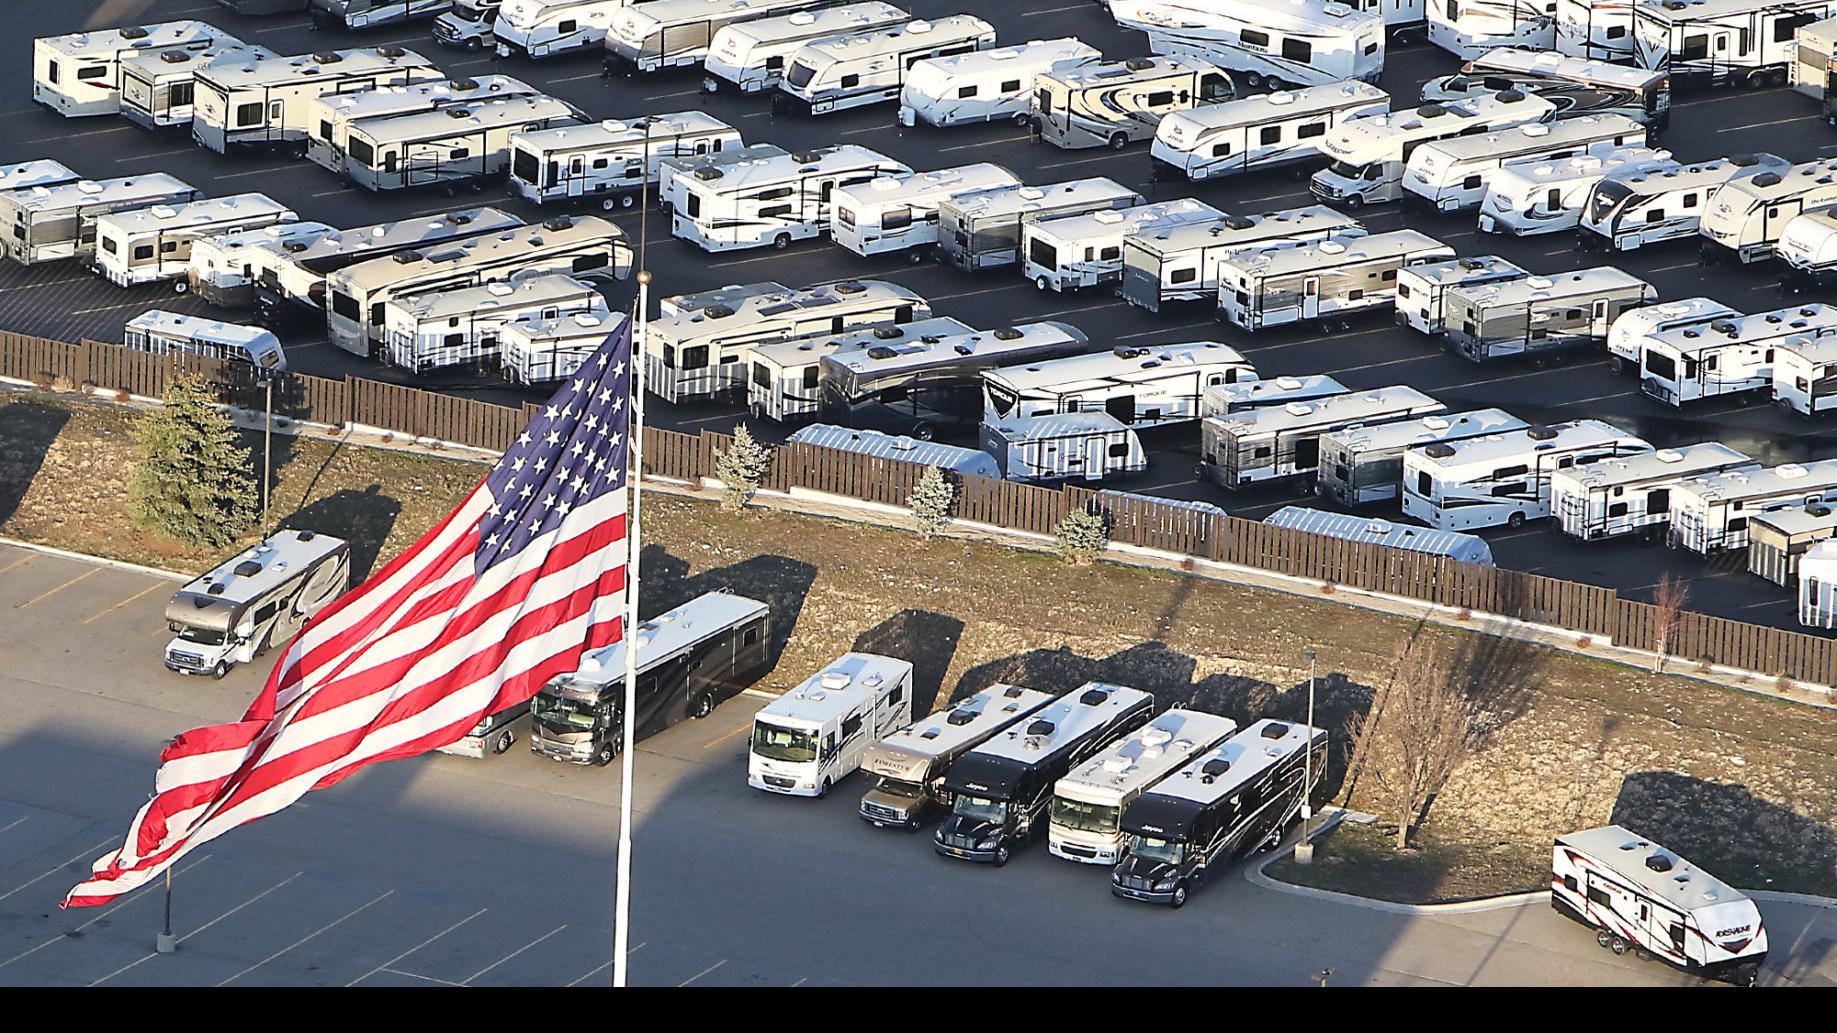 RV sales spike during the pandemic: Rocket RV sees major change